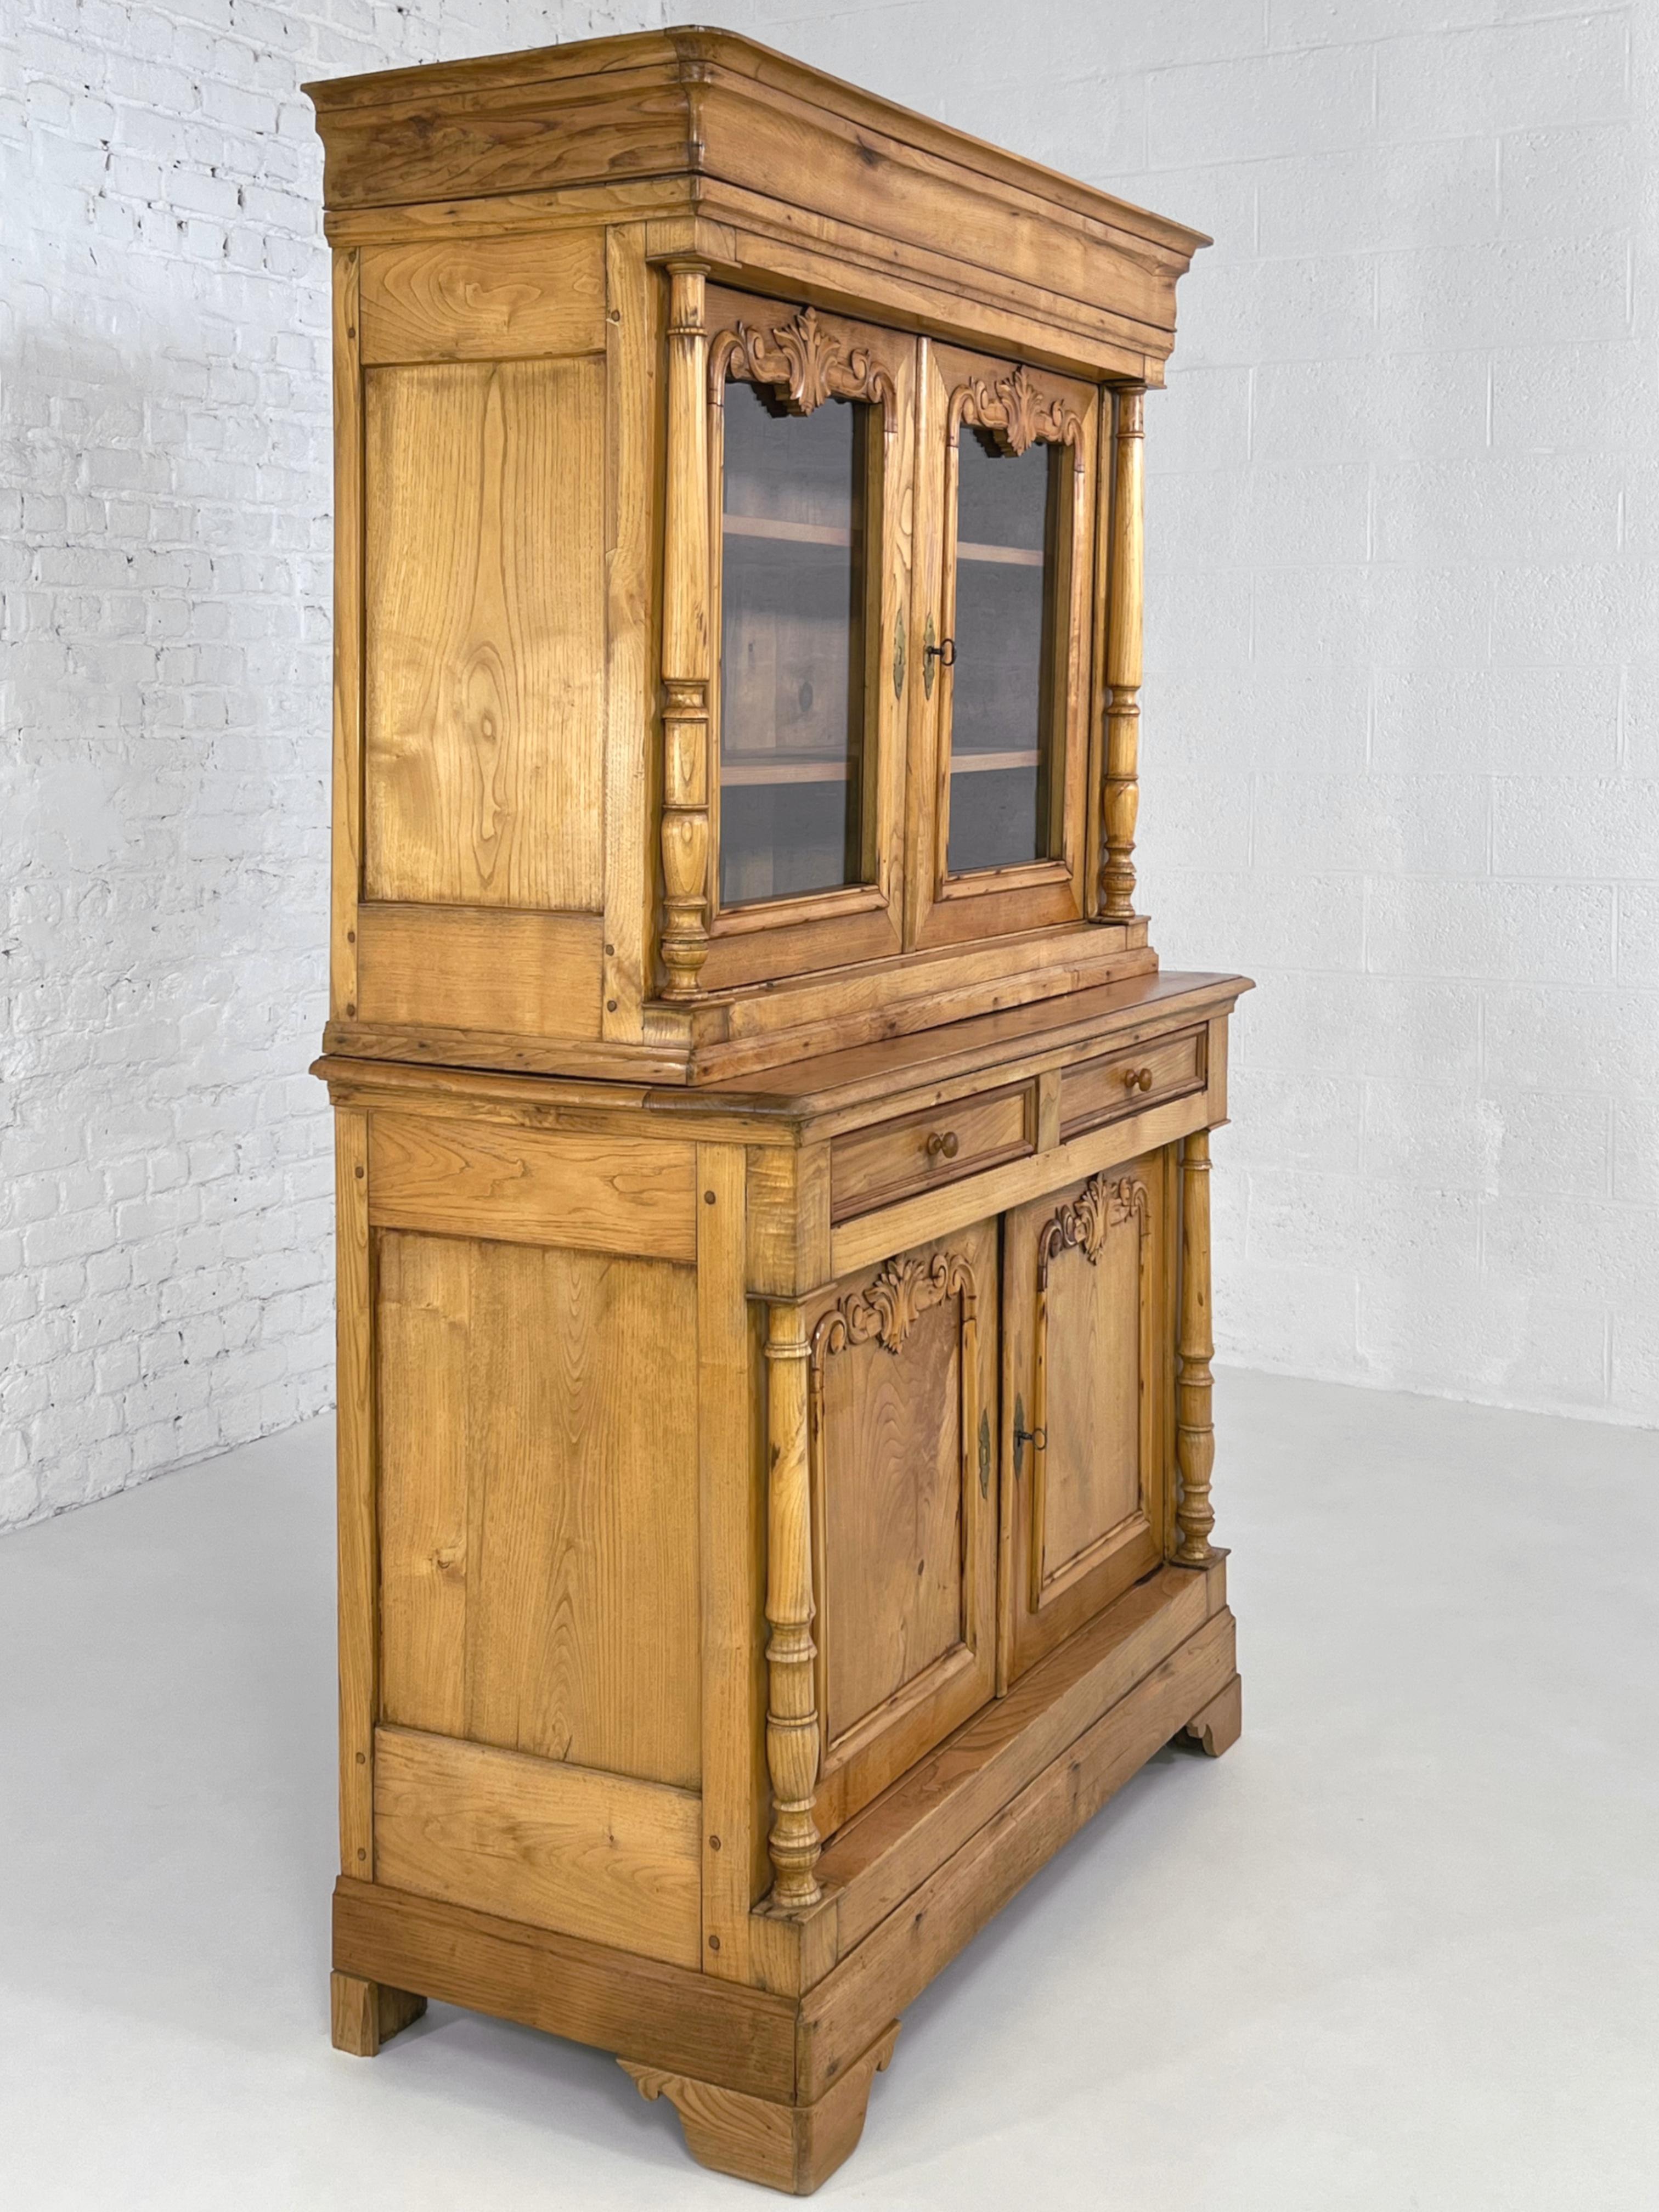 French Antic Alpine Chalet Chic Pine Wood and Glass Armoire Vitrine Cabinet In Good Condition For Sale In Tourcoing, FR